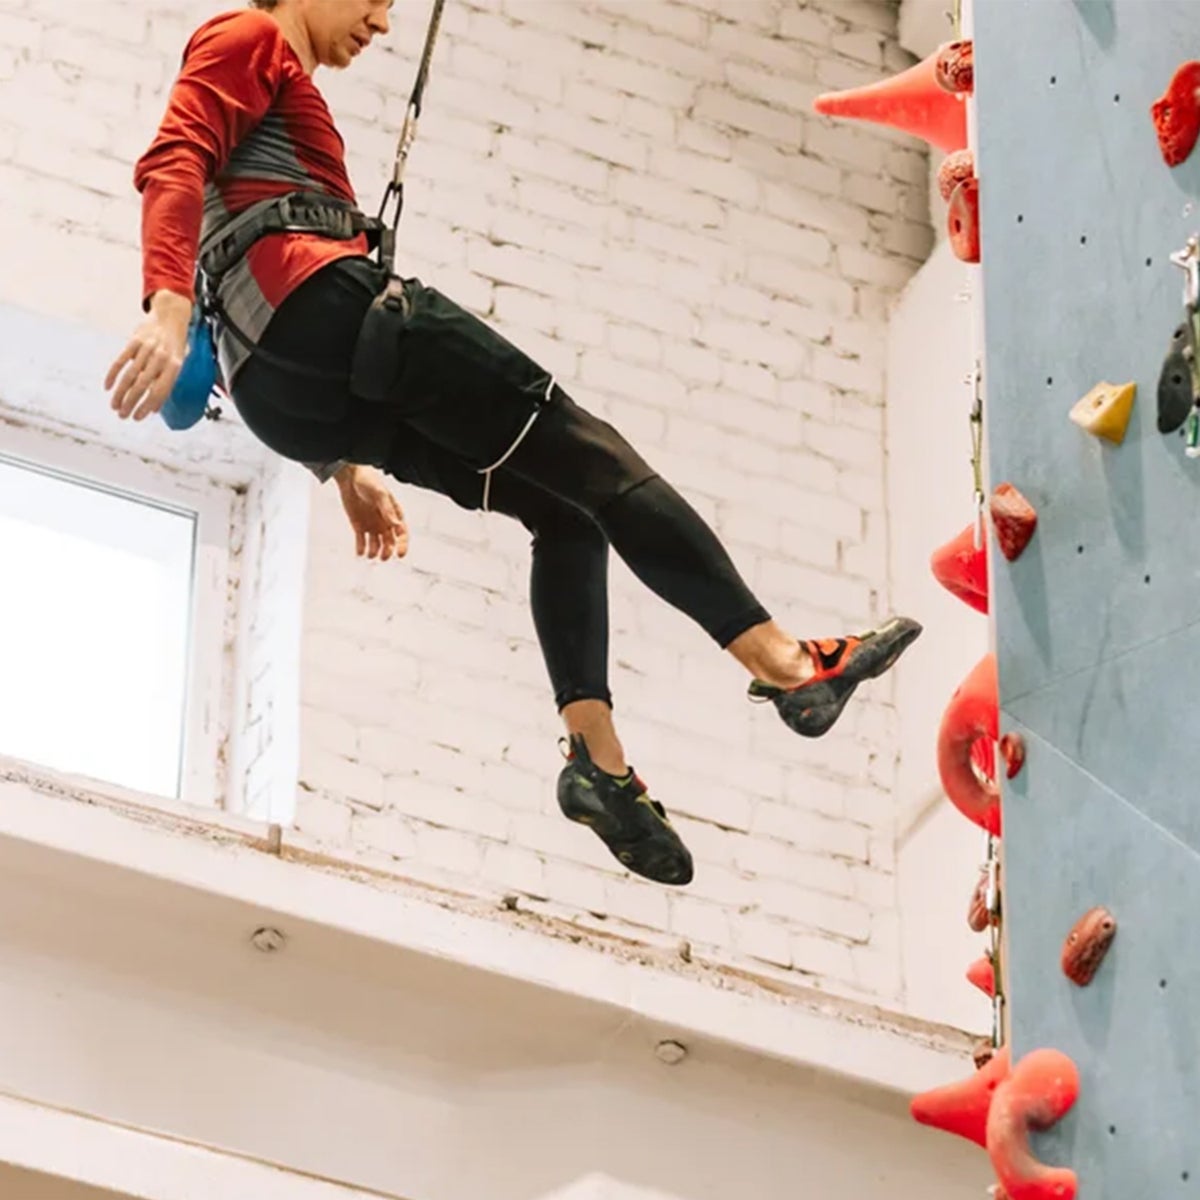 Gym and Auto Belay Manufacturer to Pay $6 Million in Settlement for Auto Belay Accident